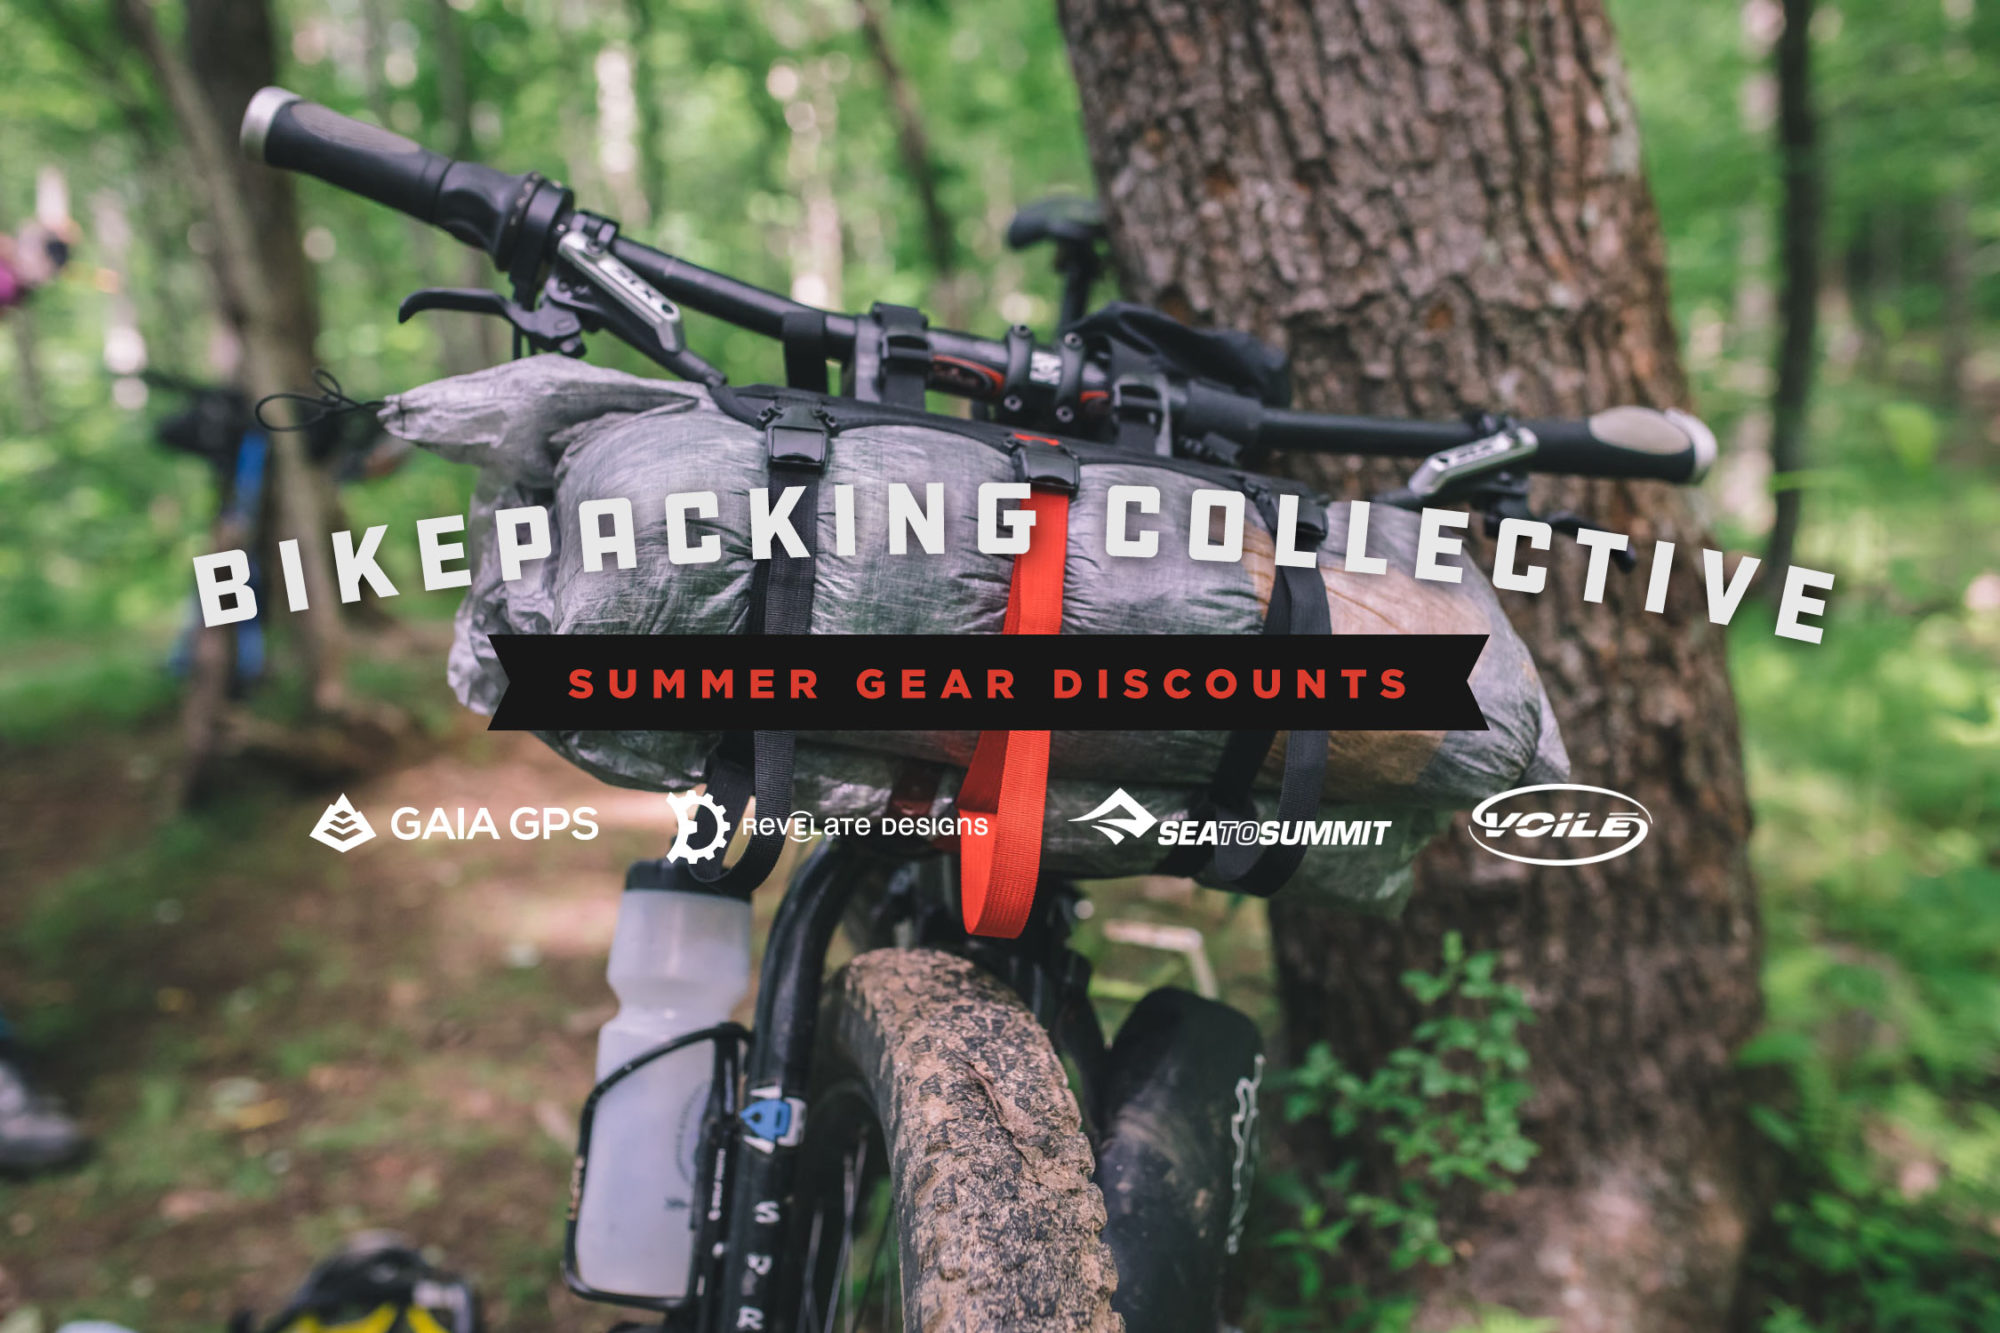 Bikepacking Collective Discounts, Gaia GPS, Revelate Designs, Sea to Summit, Voile Straps